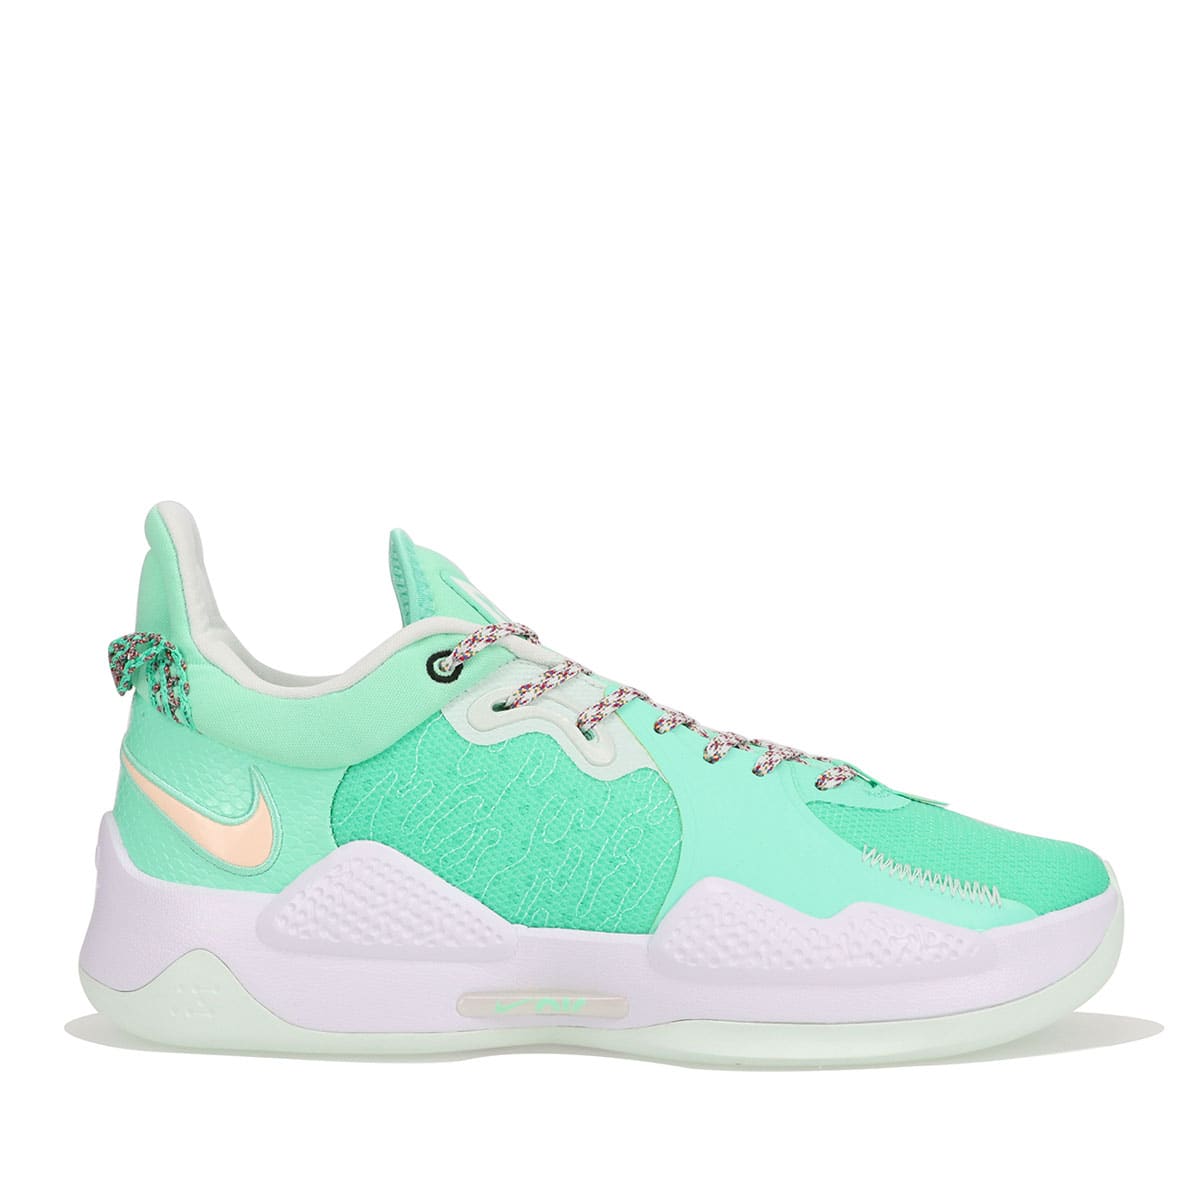 NIKE PG 5 EP GREEN GLOW/BARELY GREEN GLACIER BLUE SP I